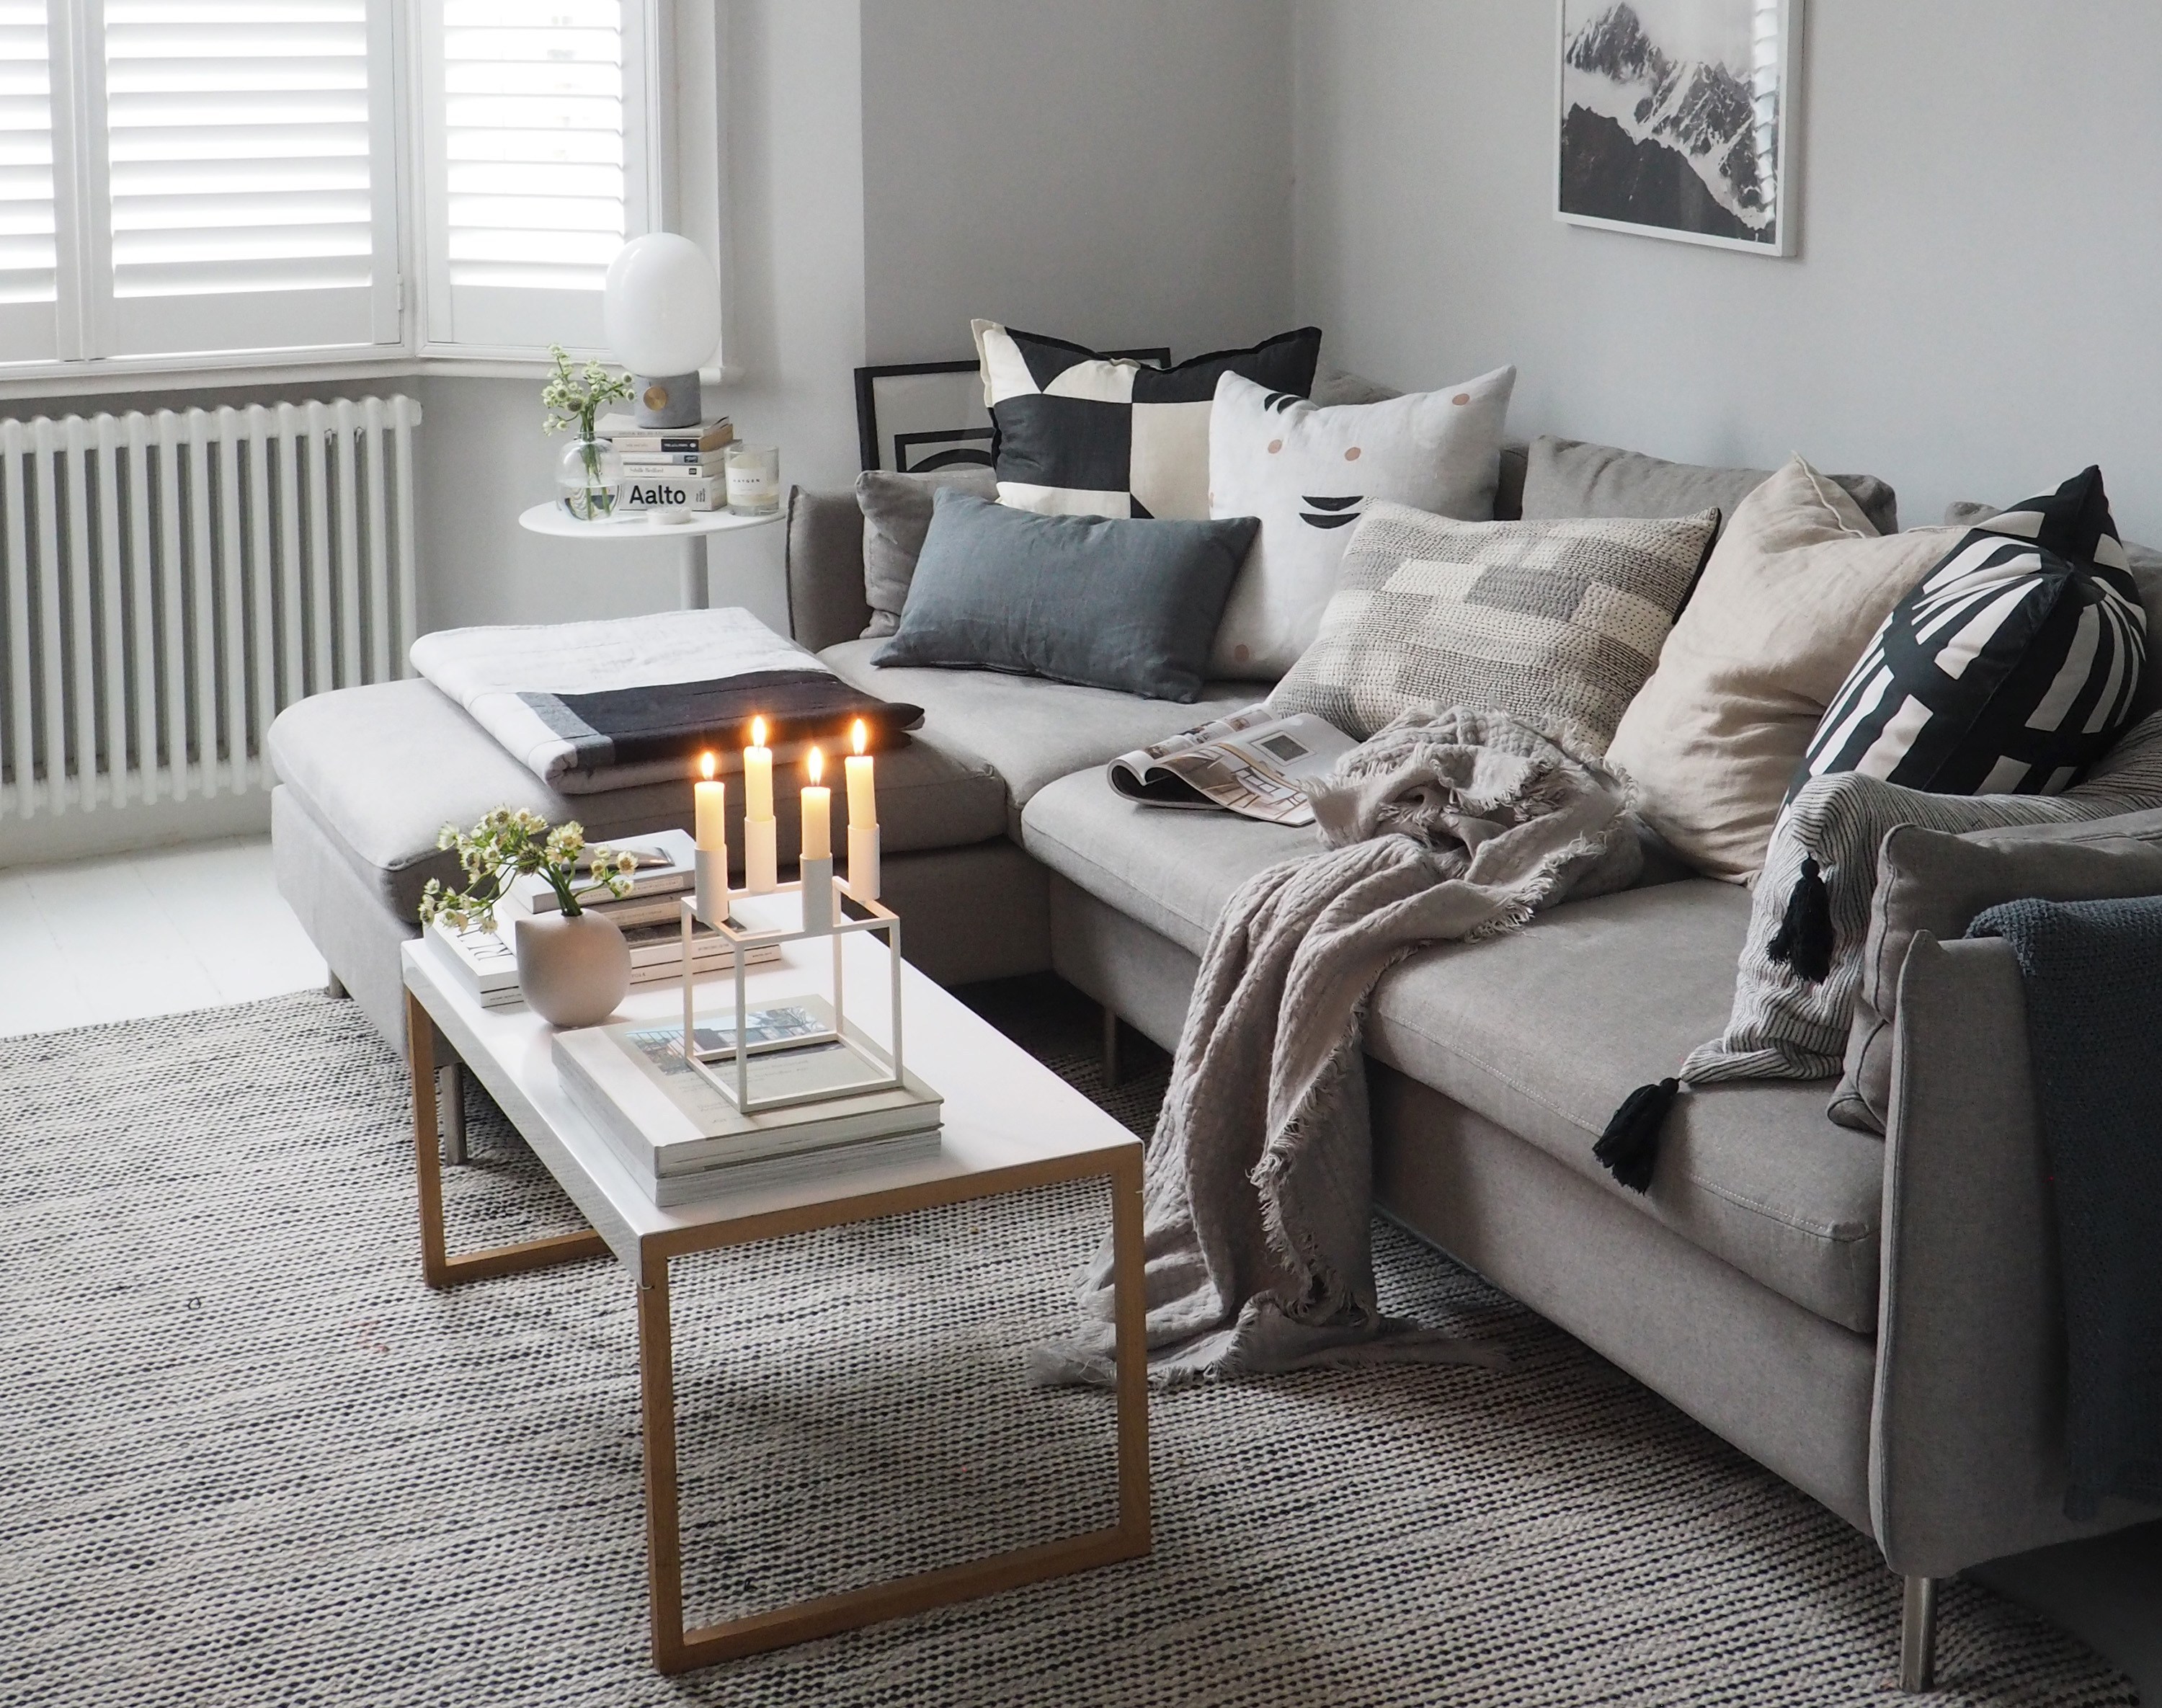 Winter styling tips, keeping it cosy | Manor Lakes